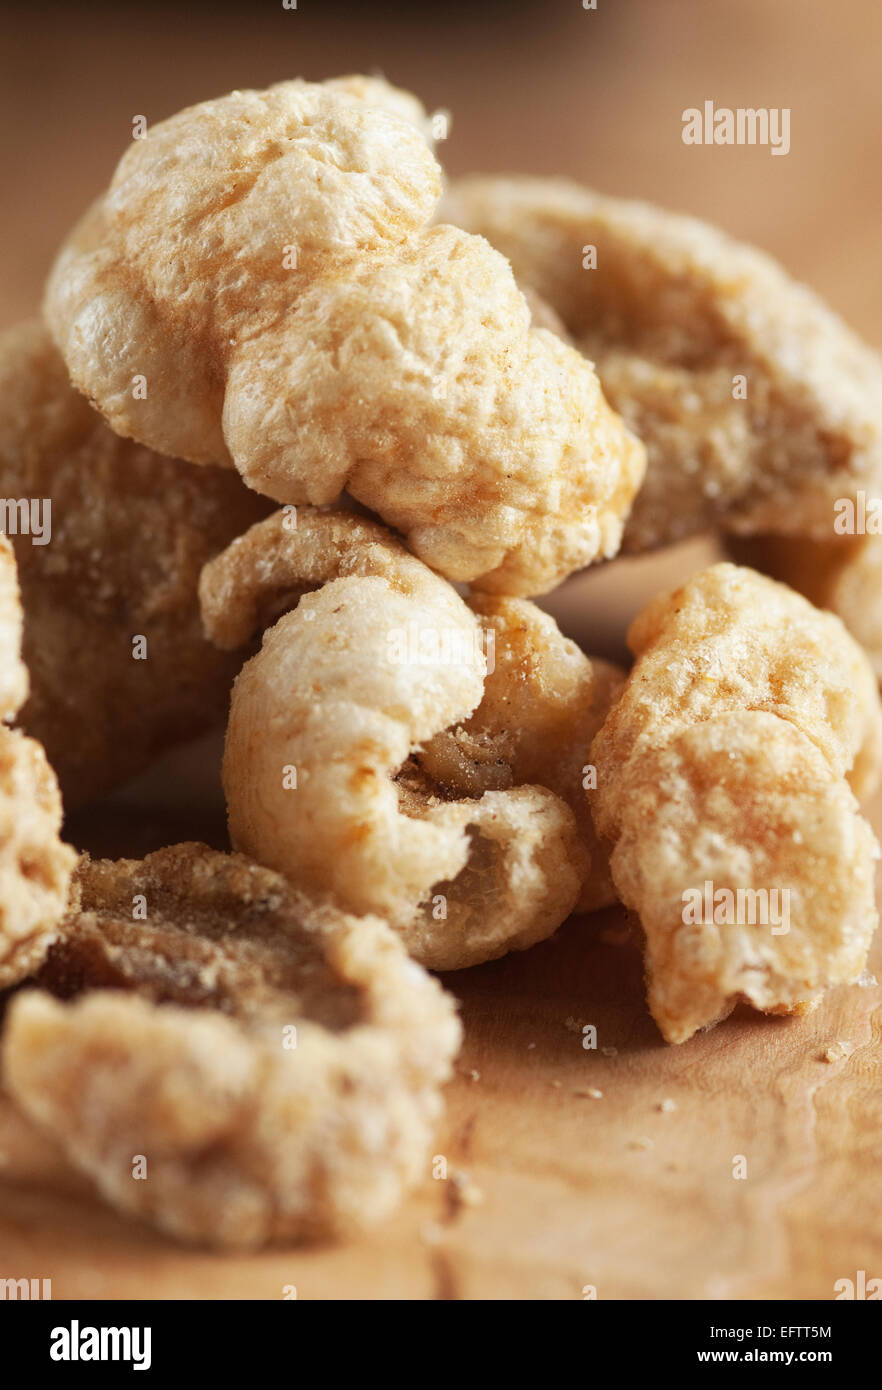 Still life food image of Pork Scratchings Crackling Snack Stock Photo